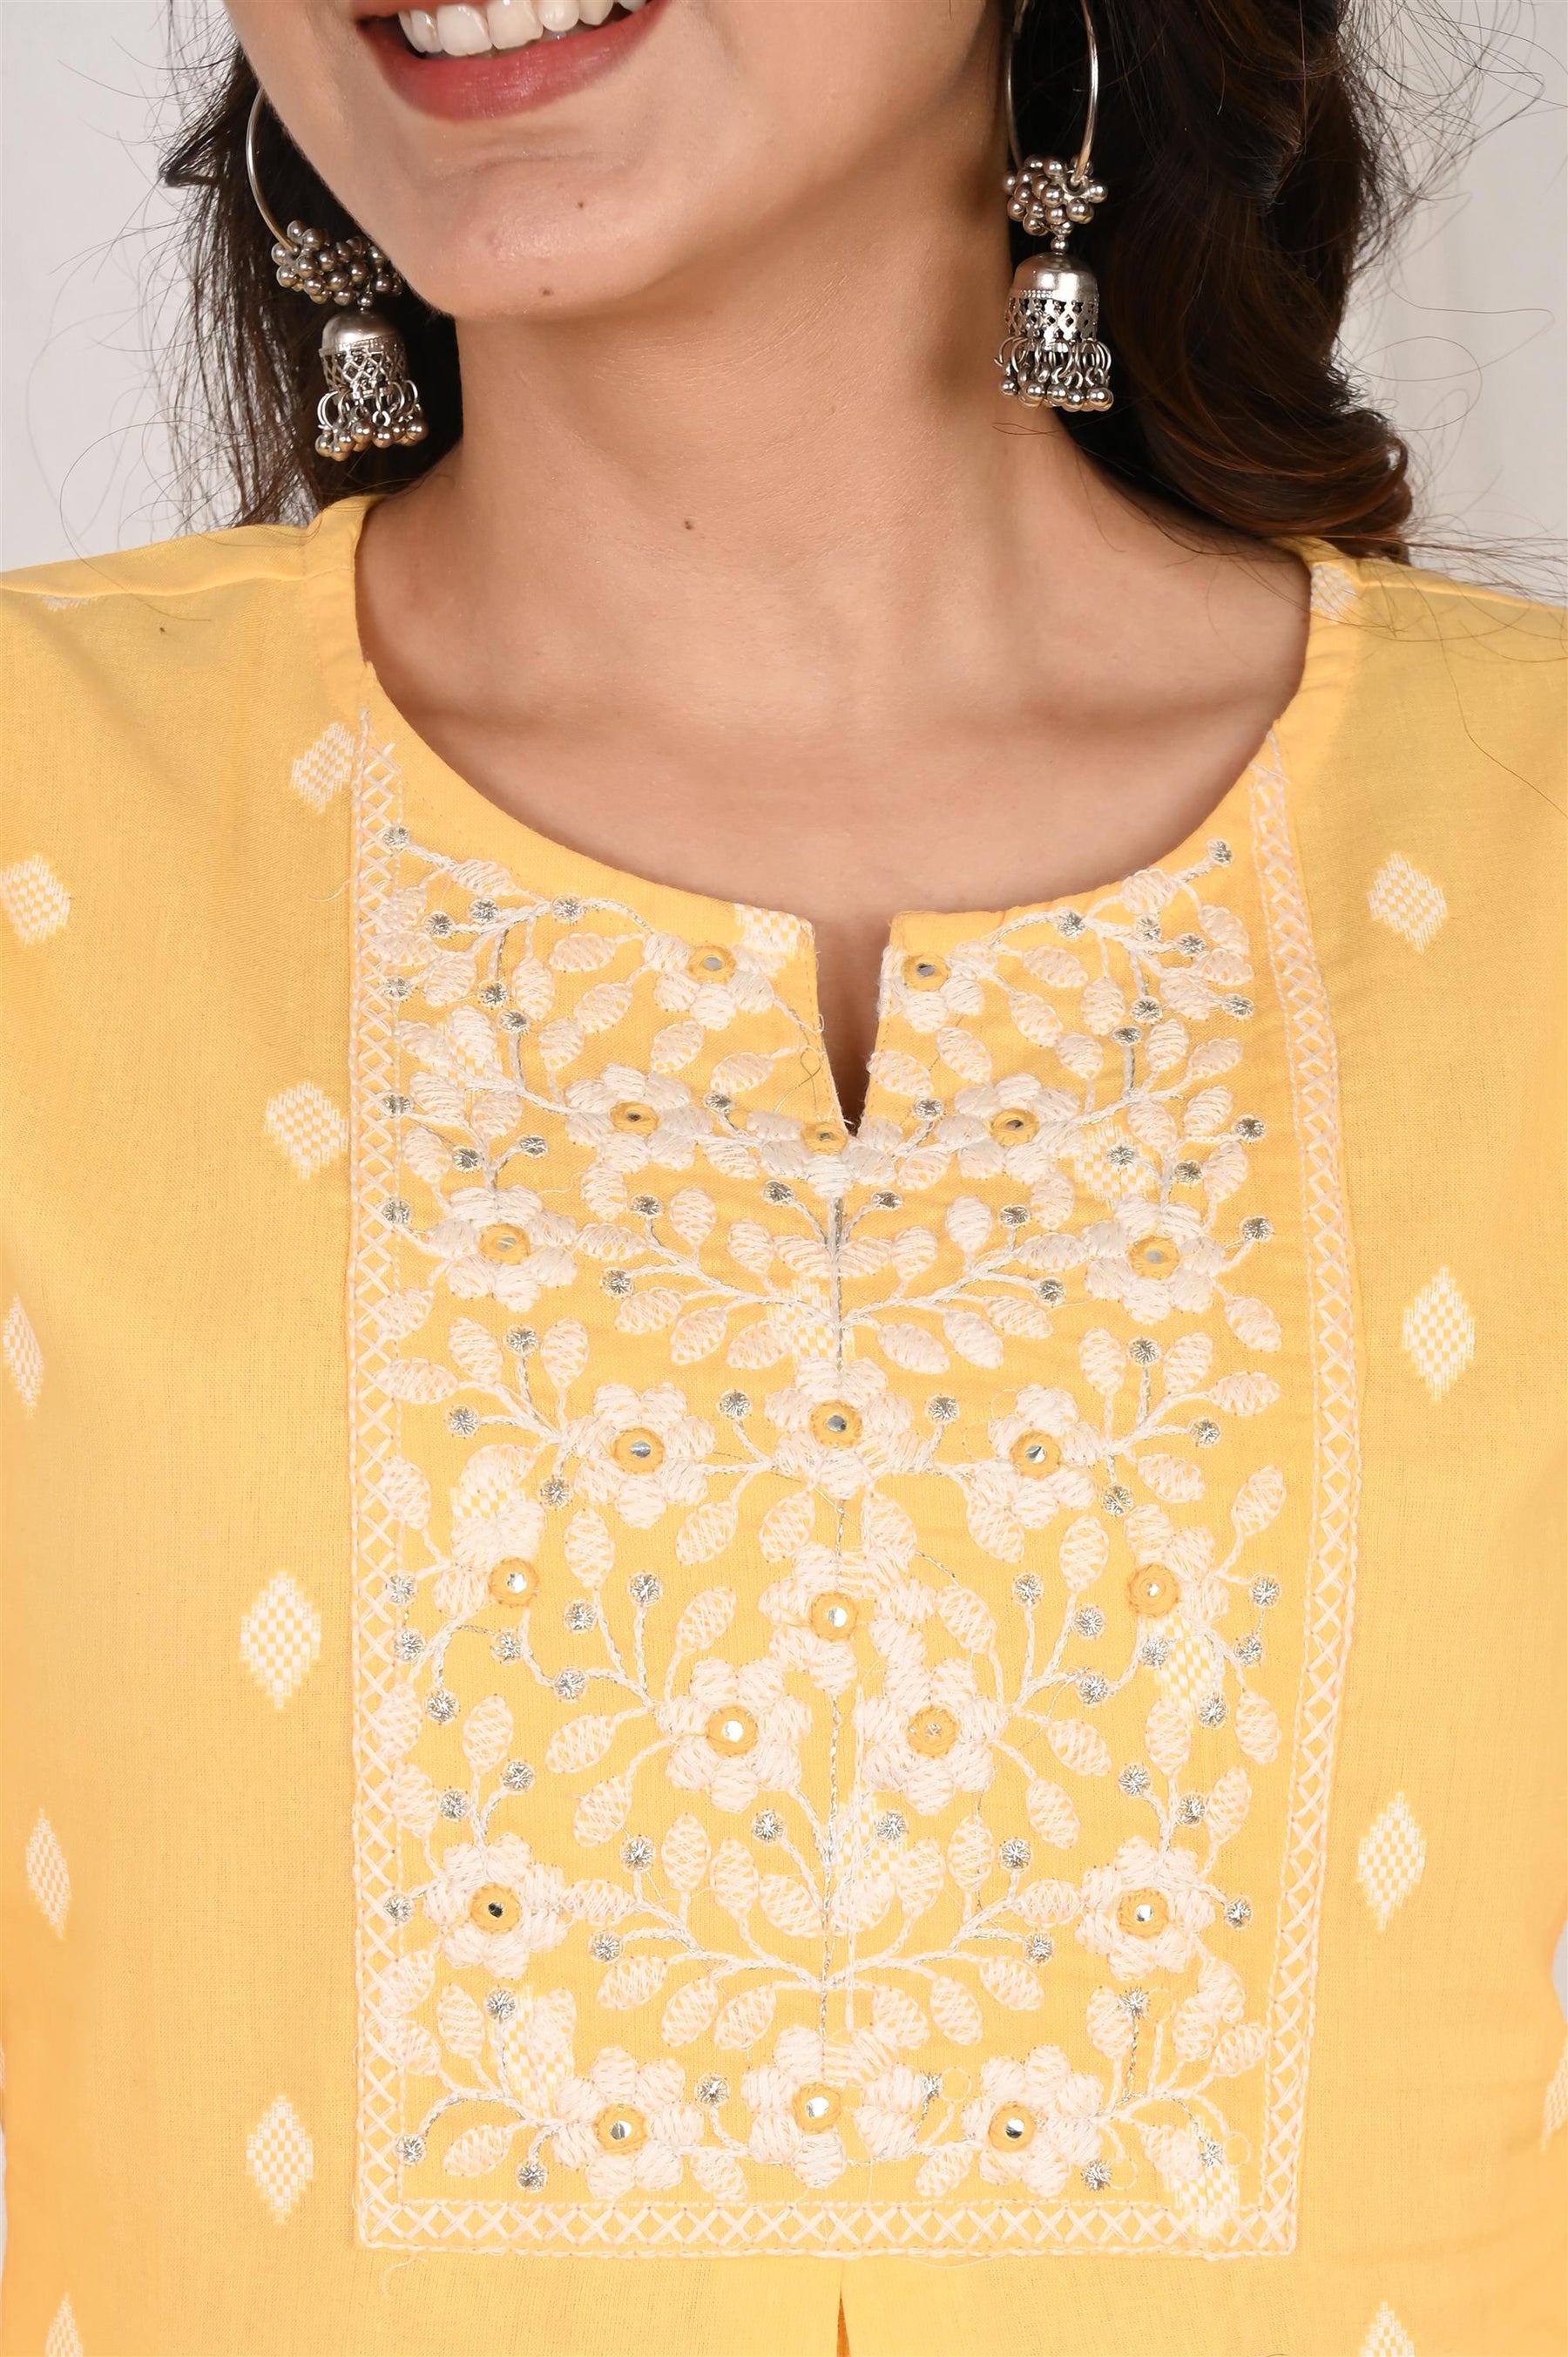 Embroidered Yellow A-Line Top